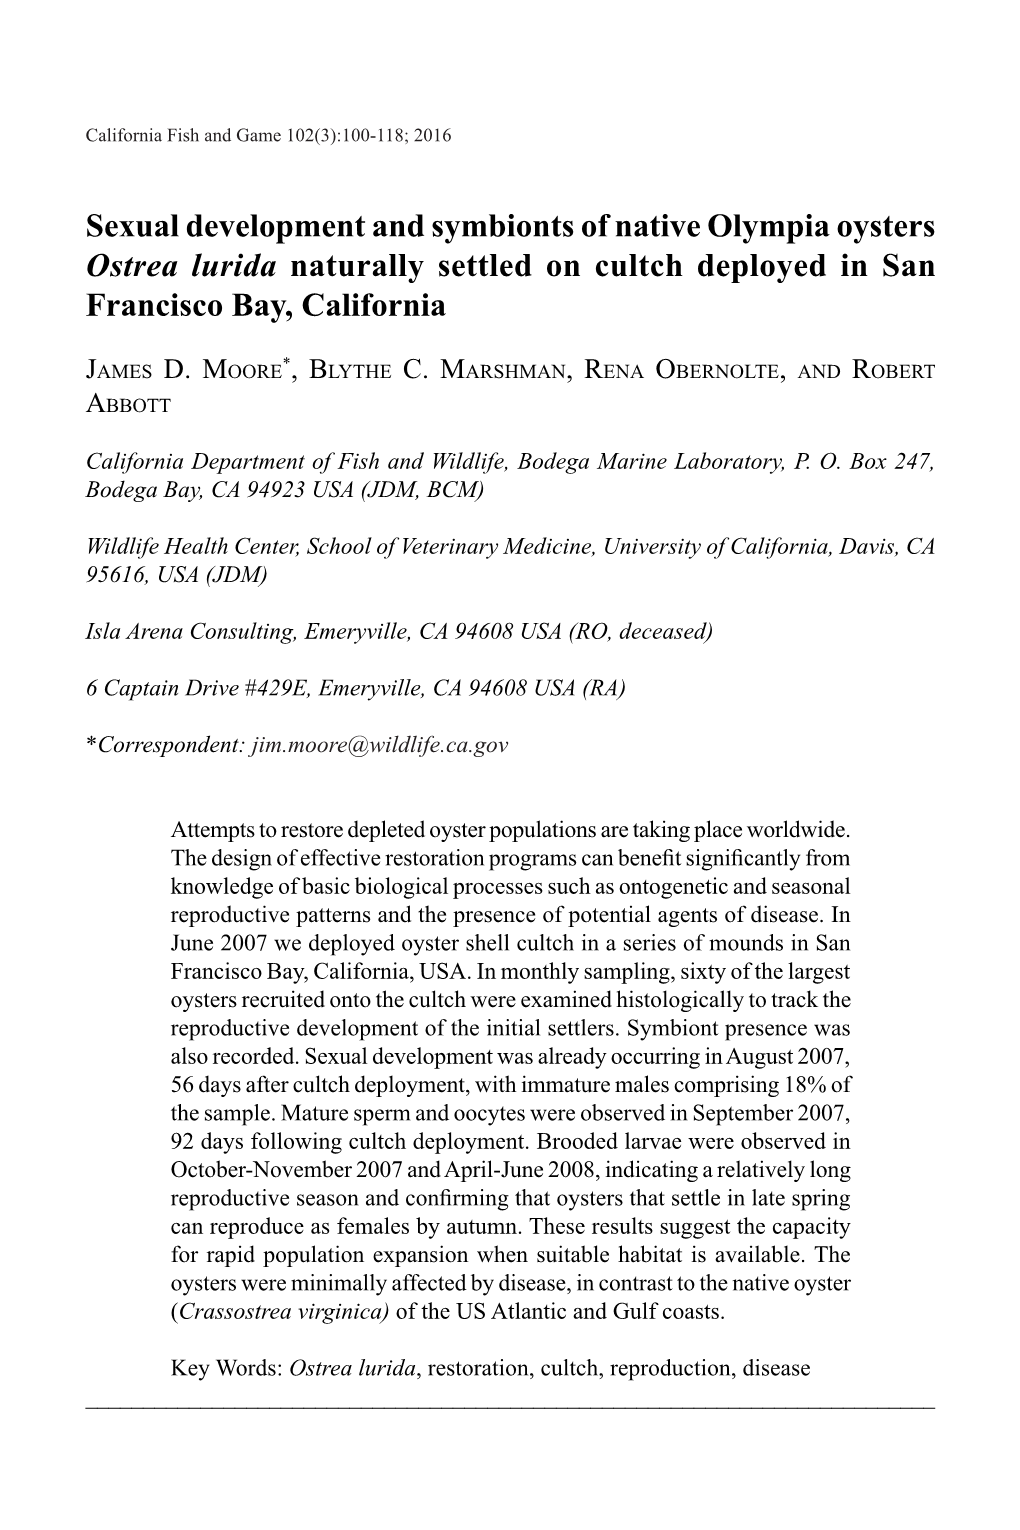 Sexual Development and Symbionts of Native Olympia Oysters Ostrea Lurida Naturally Settled on Cultch Deployed in San Francisco Bay, California